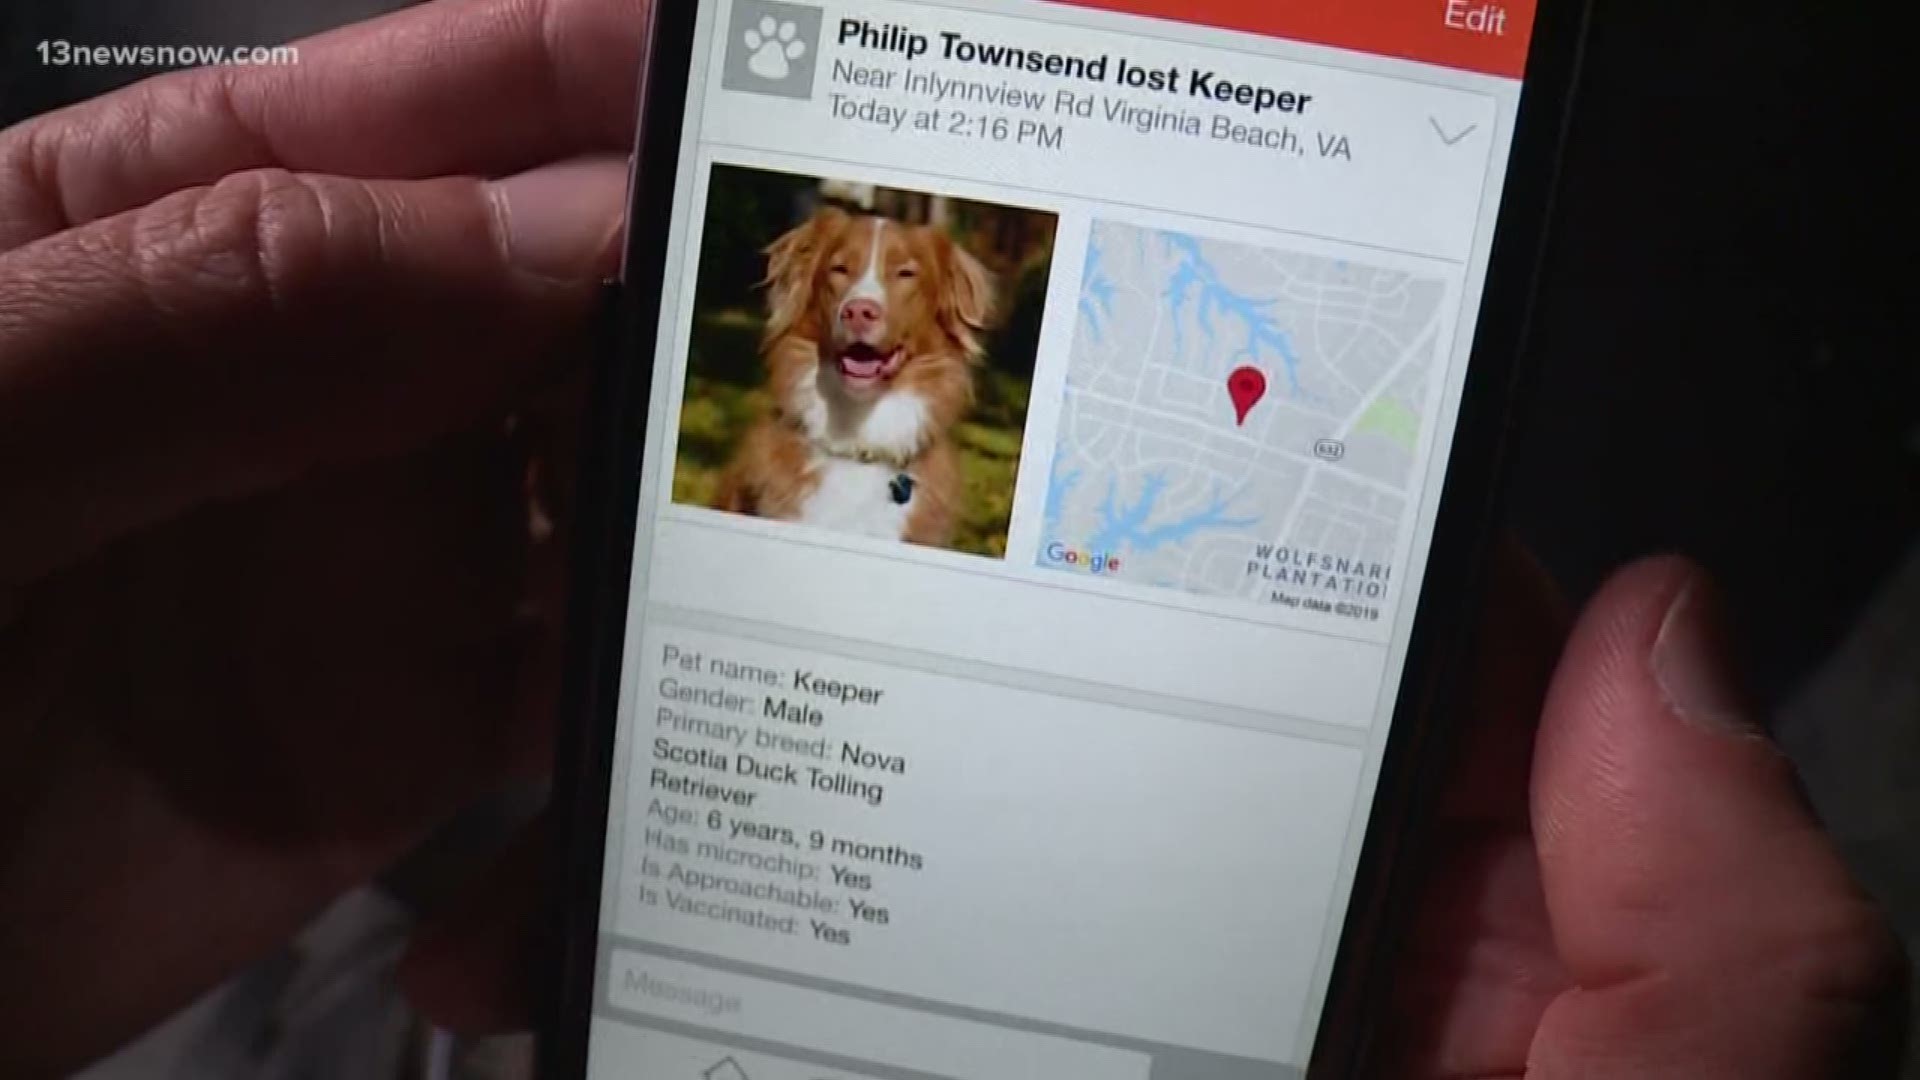 Norfolk Animal Care and Adoption Center is using facial recognition to reunite lost pets with their owners. The organization is also adding the available pets for adoption on the Finding Rover app.